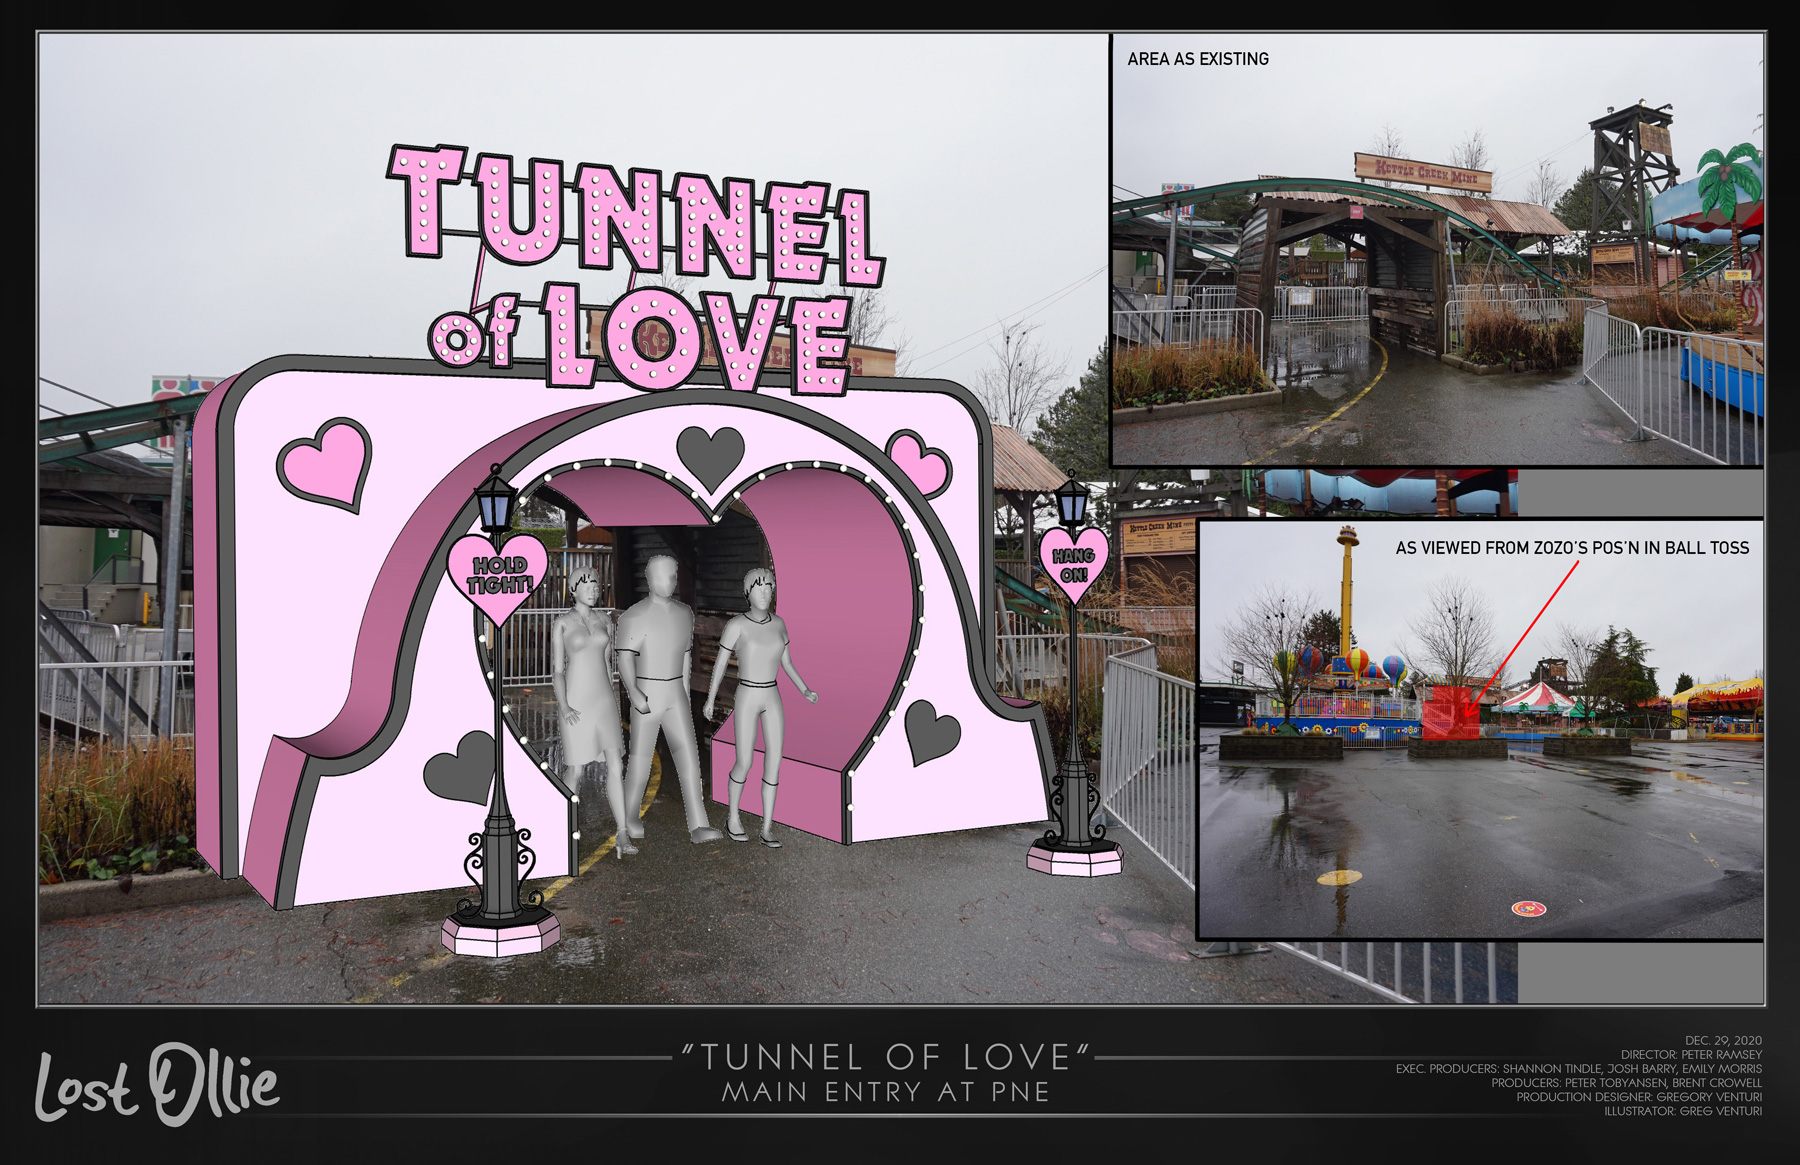 29 Lost Ollie 'Dreamland Amusement Park' Tunnel Of Love Swan Boat Ride Location Install 3D Model View & Concept